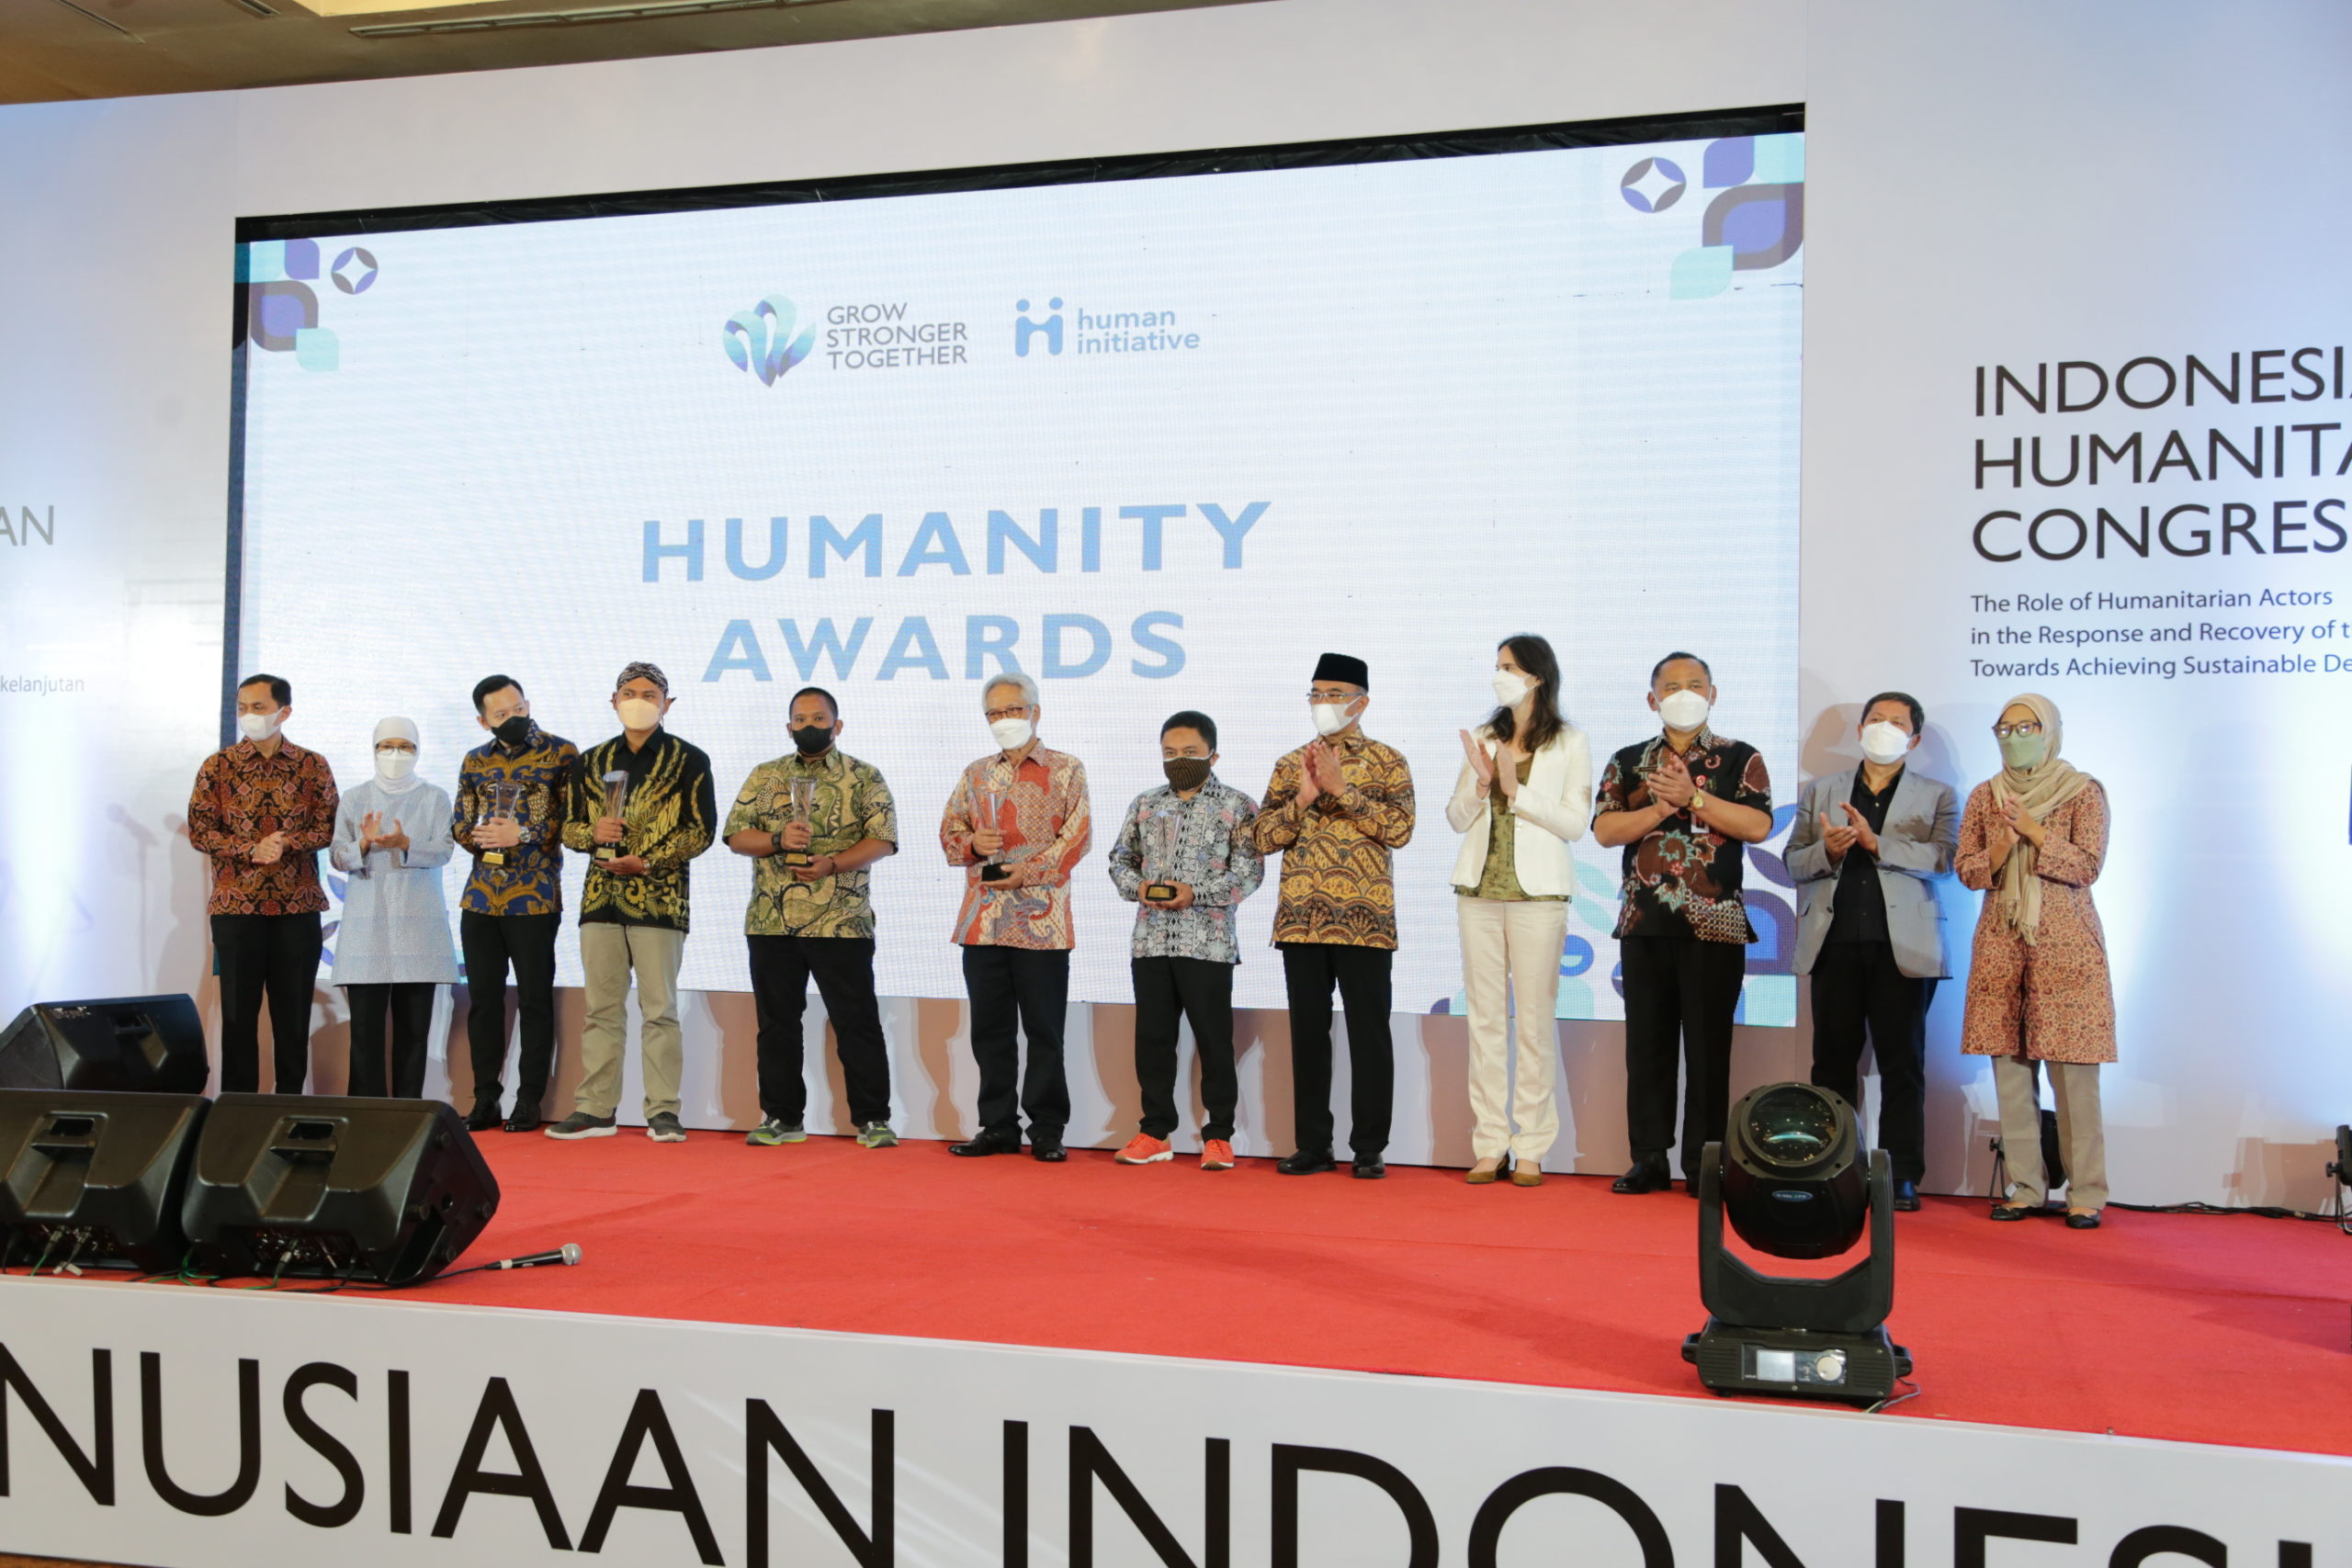 Humanity Awards 2021 by Human Initiative